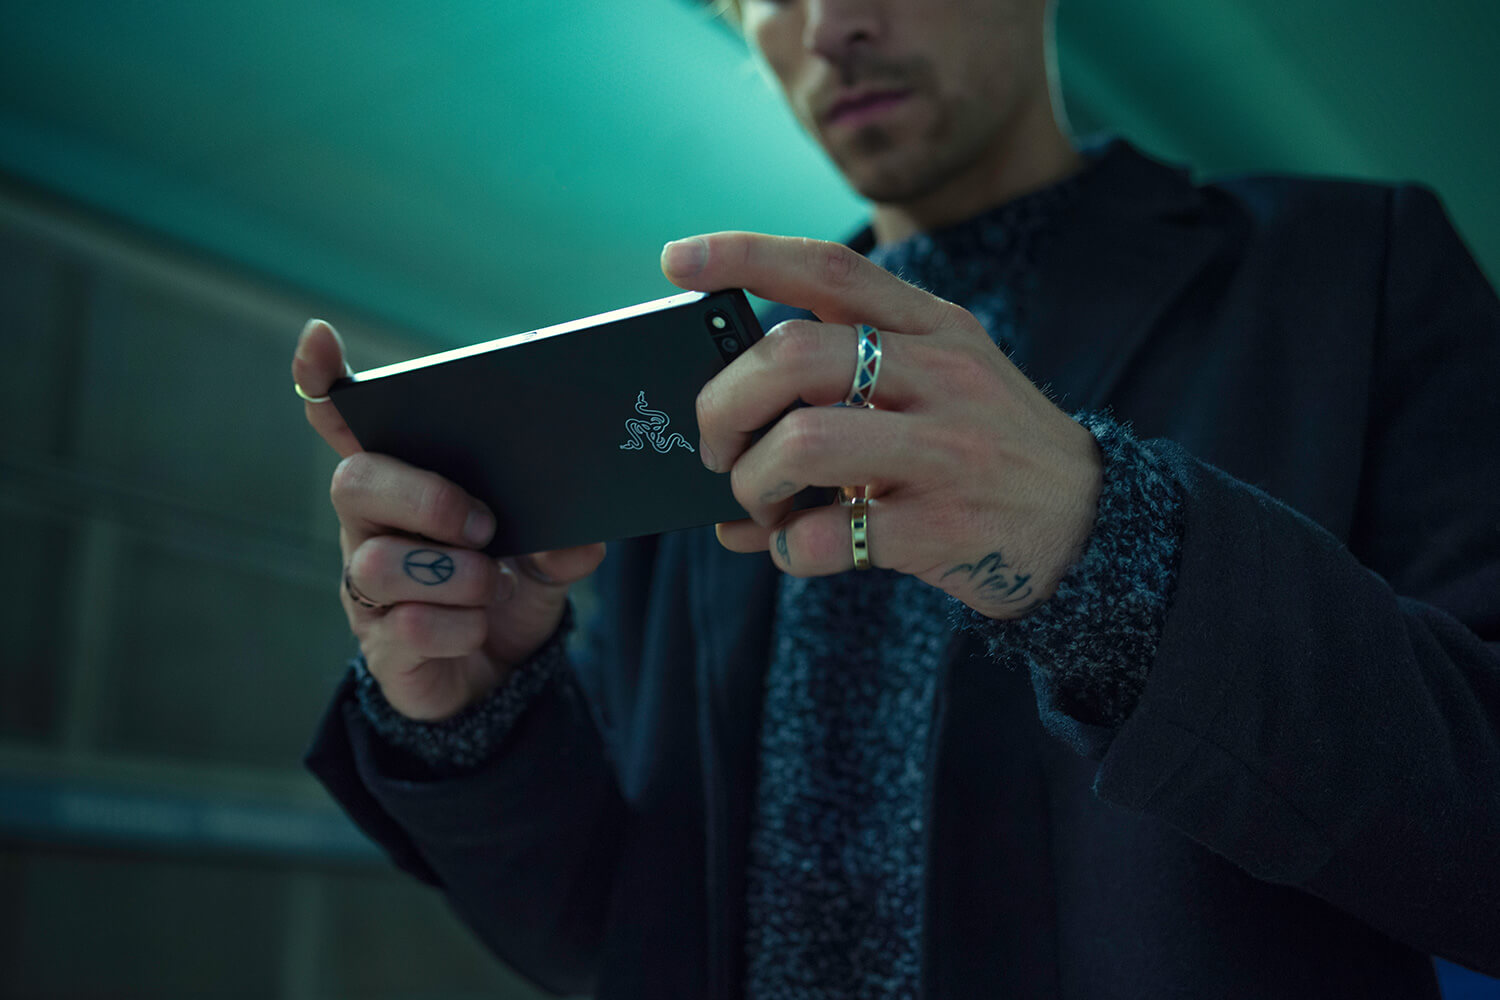 Deal alert: $100 Off for Razer Phone with Promo code 1